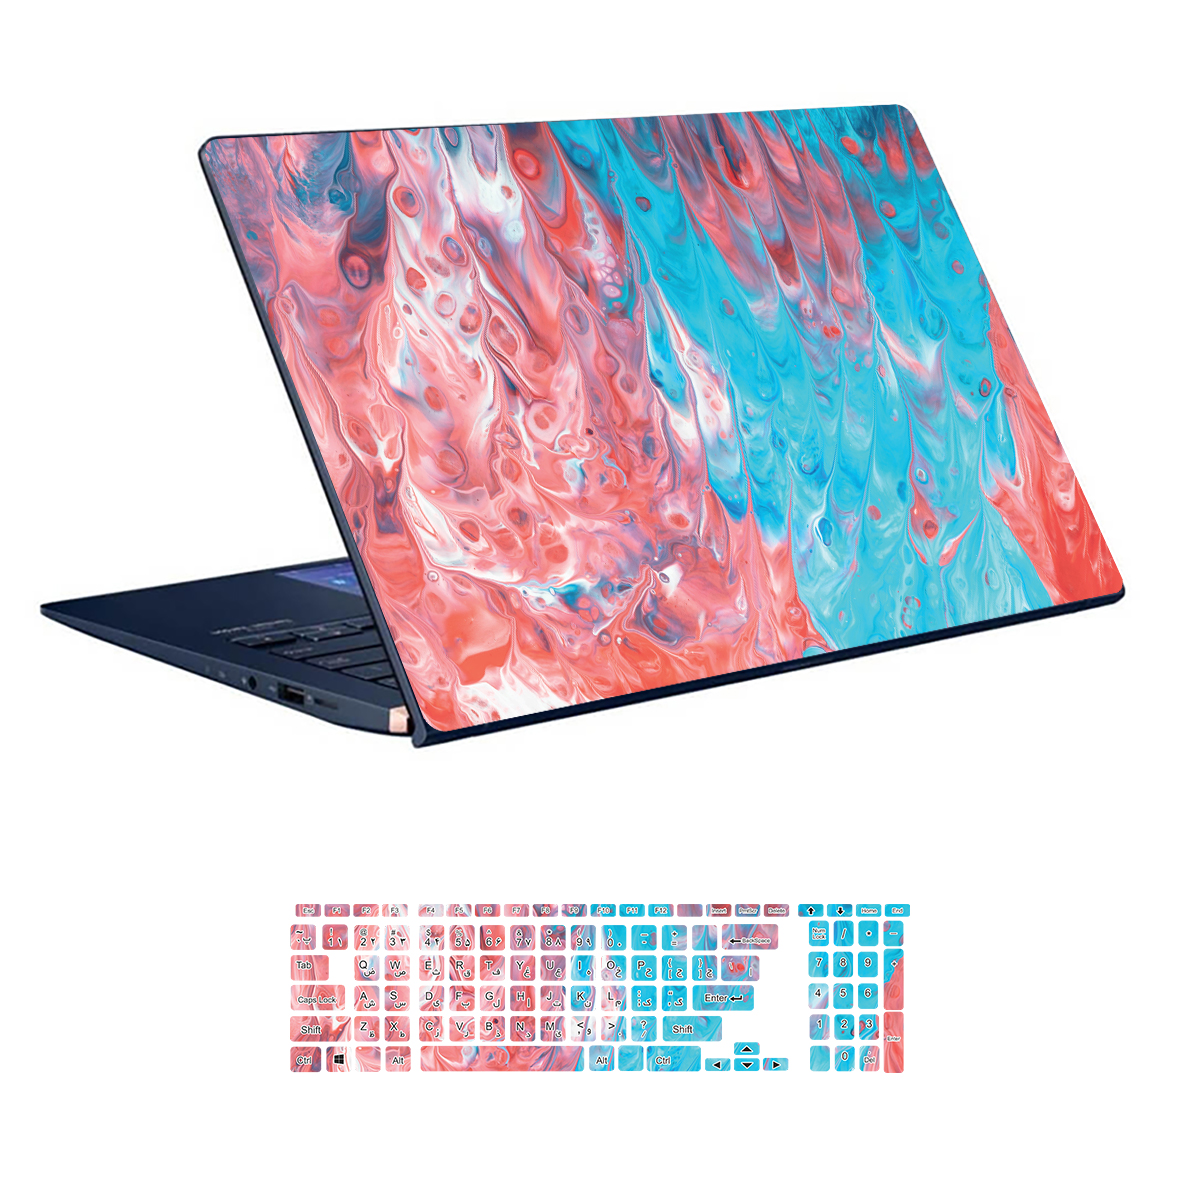 Colorful design laptop skin code 31 with keyboard sticker